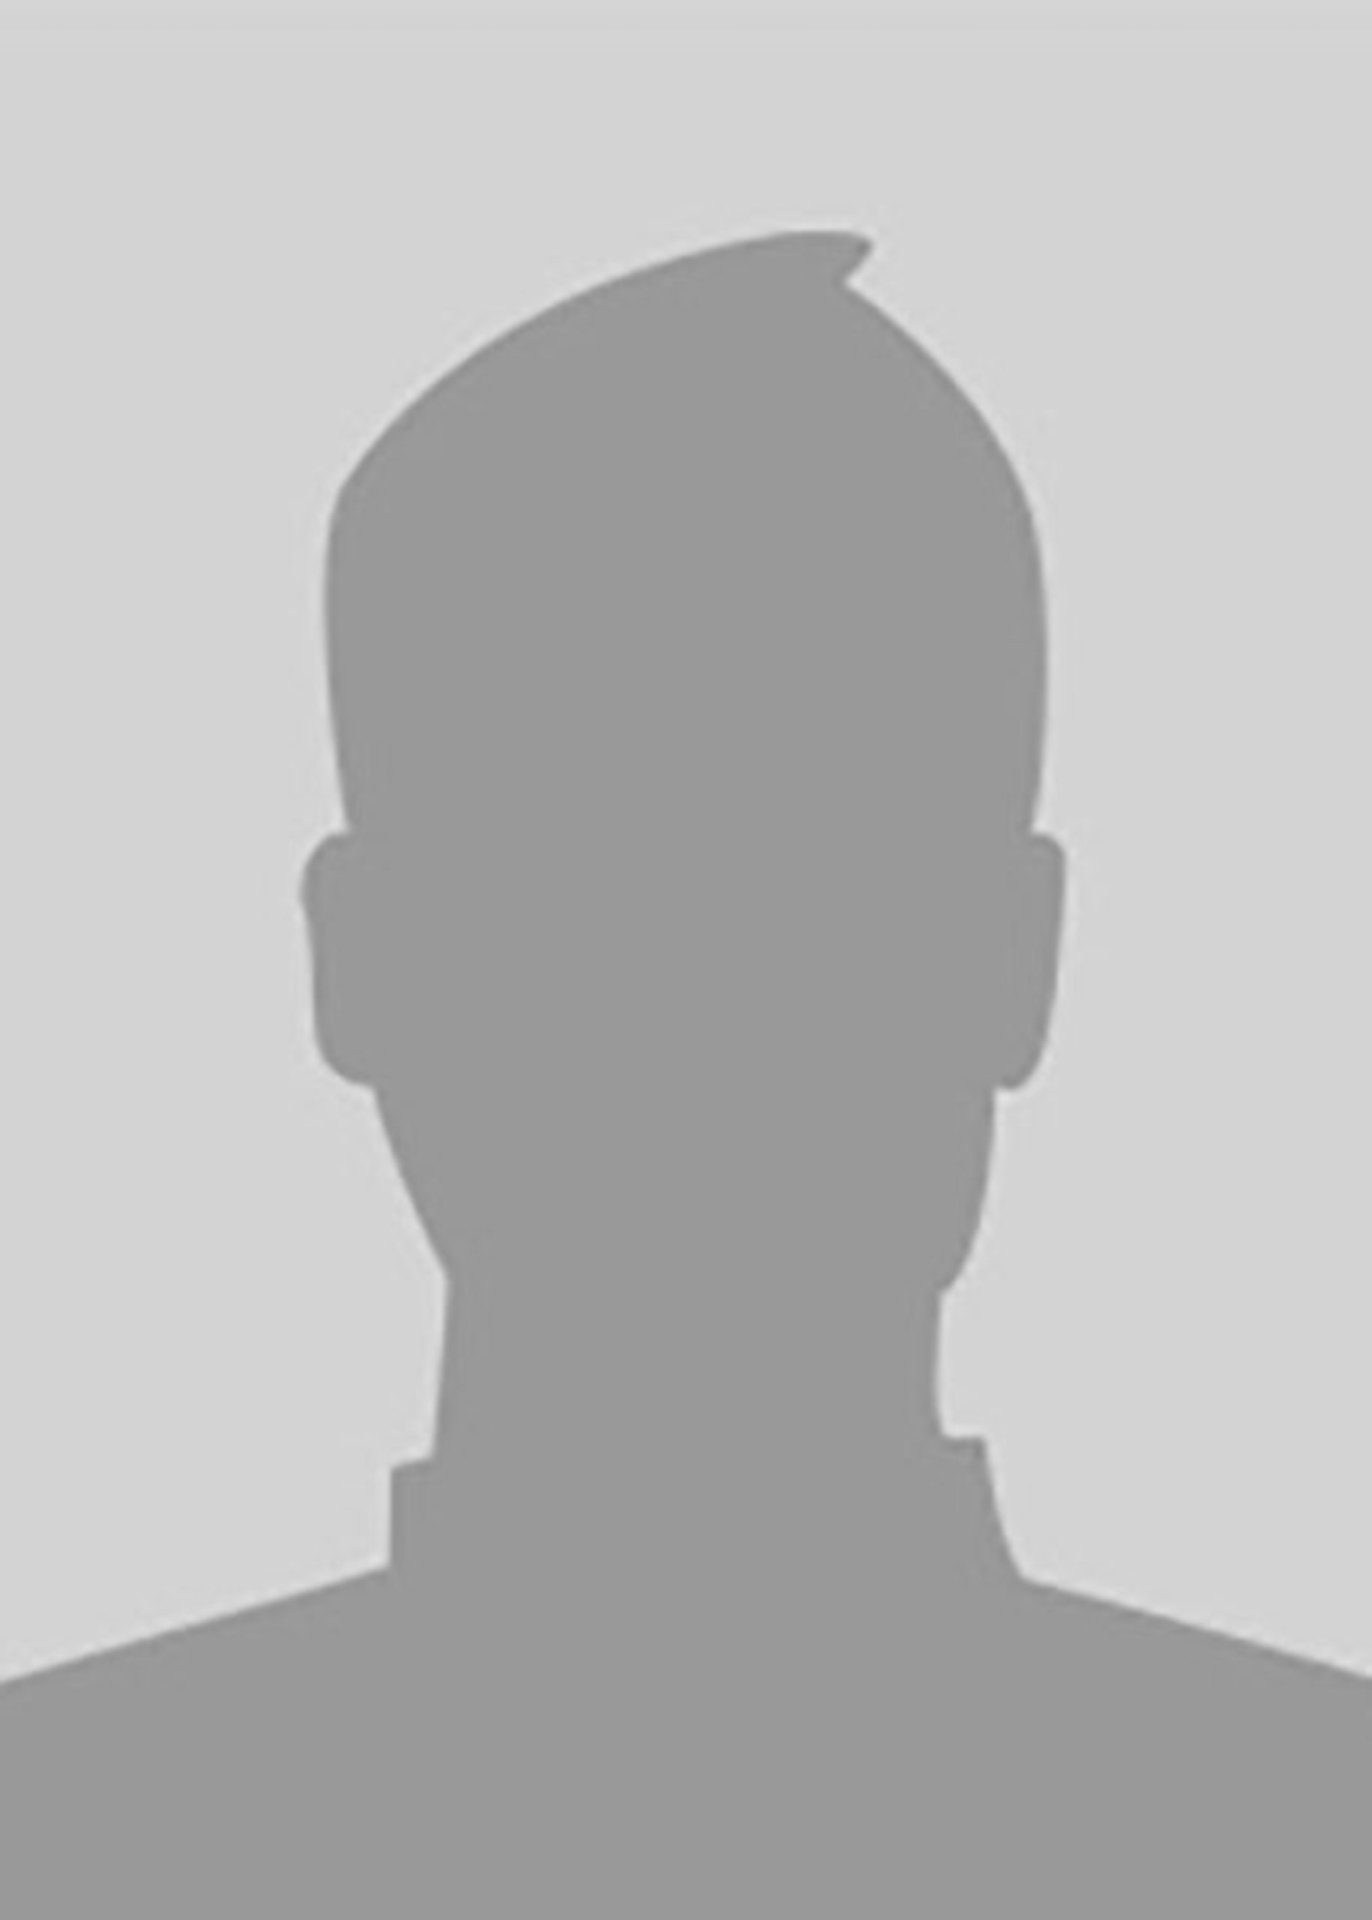 Generic silhouette of a person's profile without any discernible features, titled 